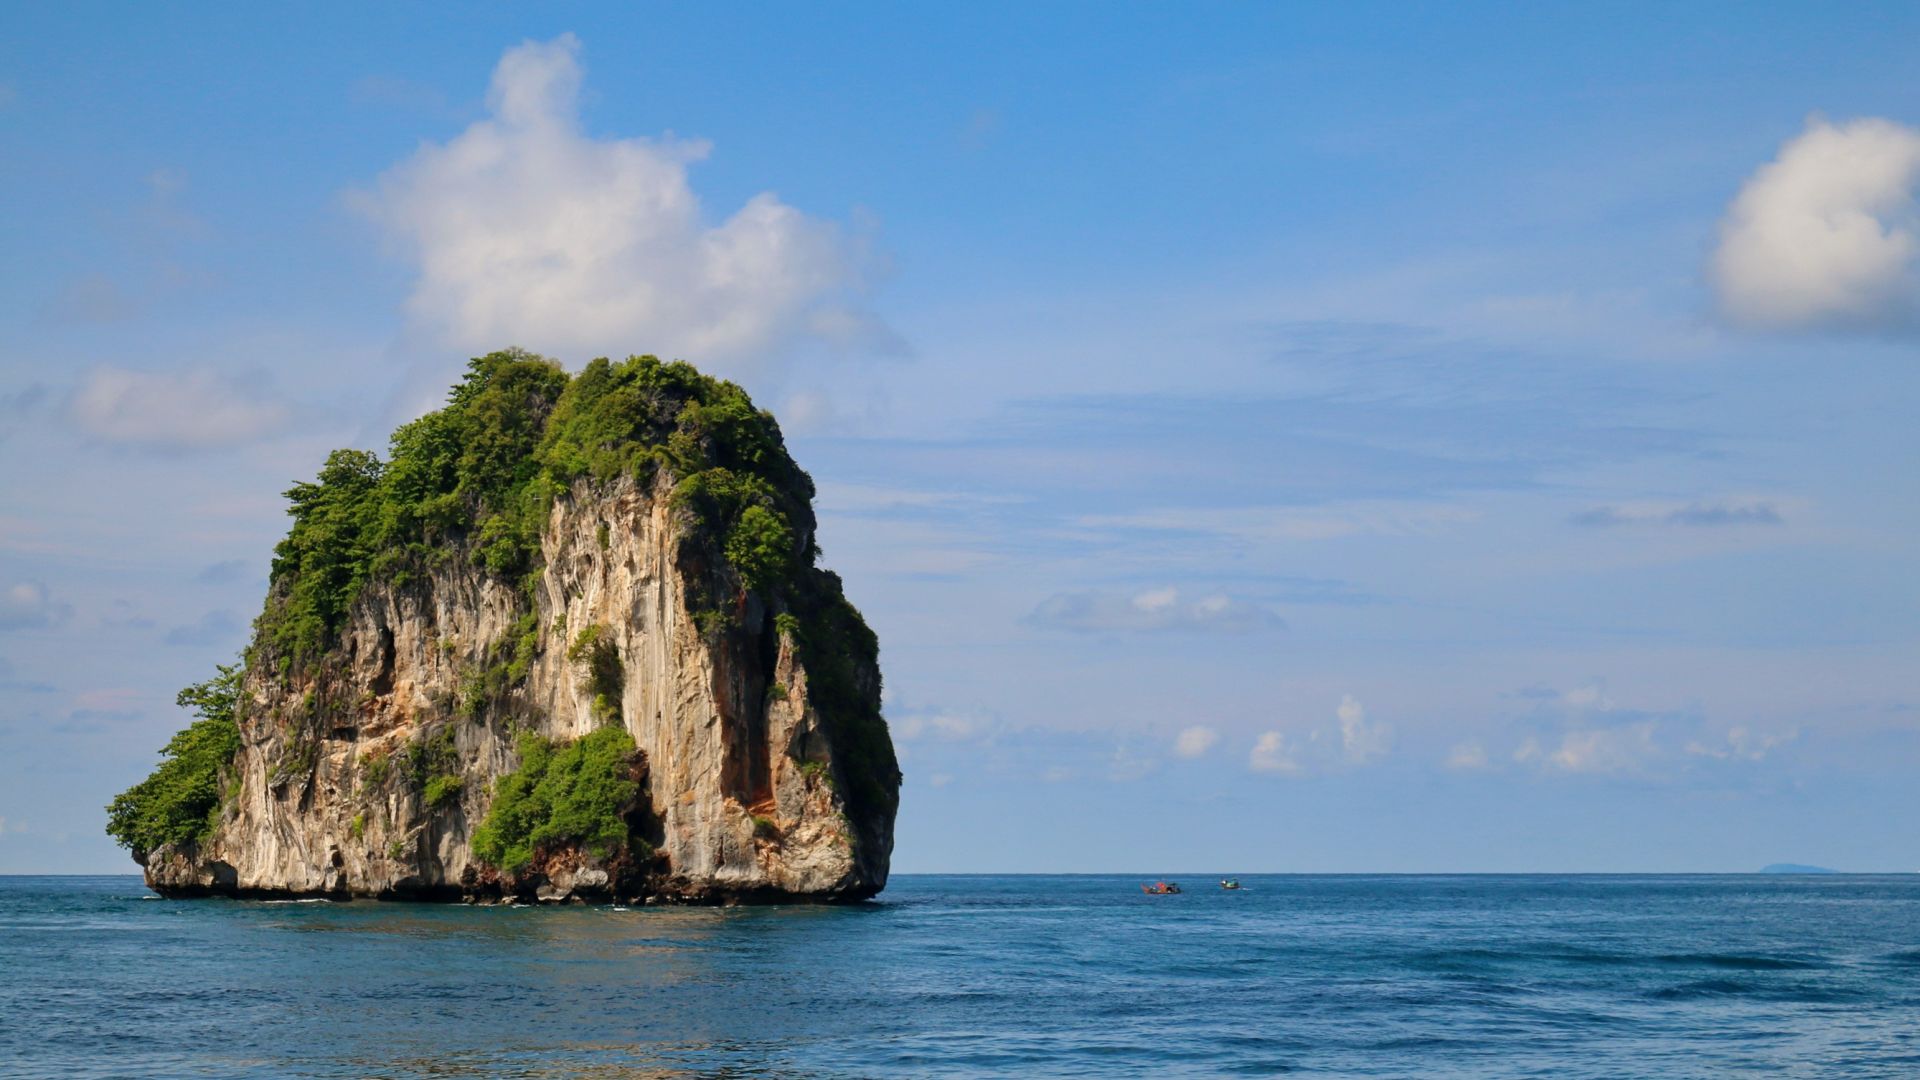 Desktop Wallpaper Phi Phi Islands, Cliff, Sea, Holiday Spot, Hd Image,  Picture, Background, 420869